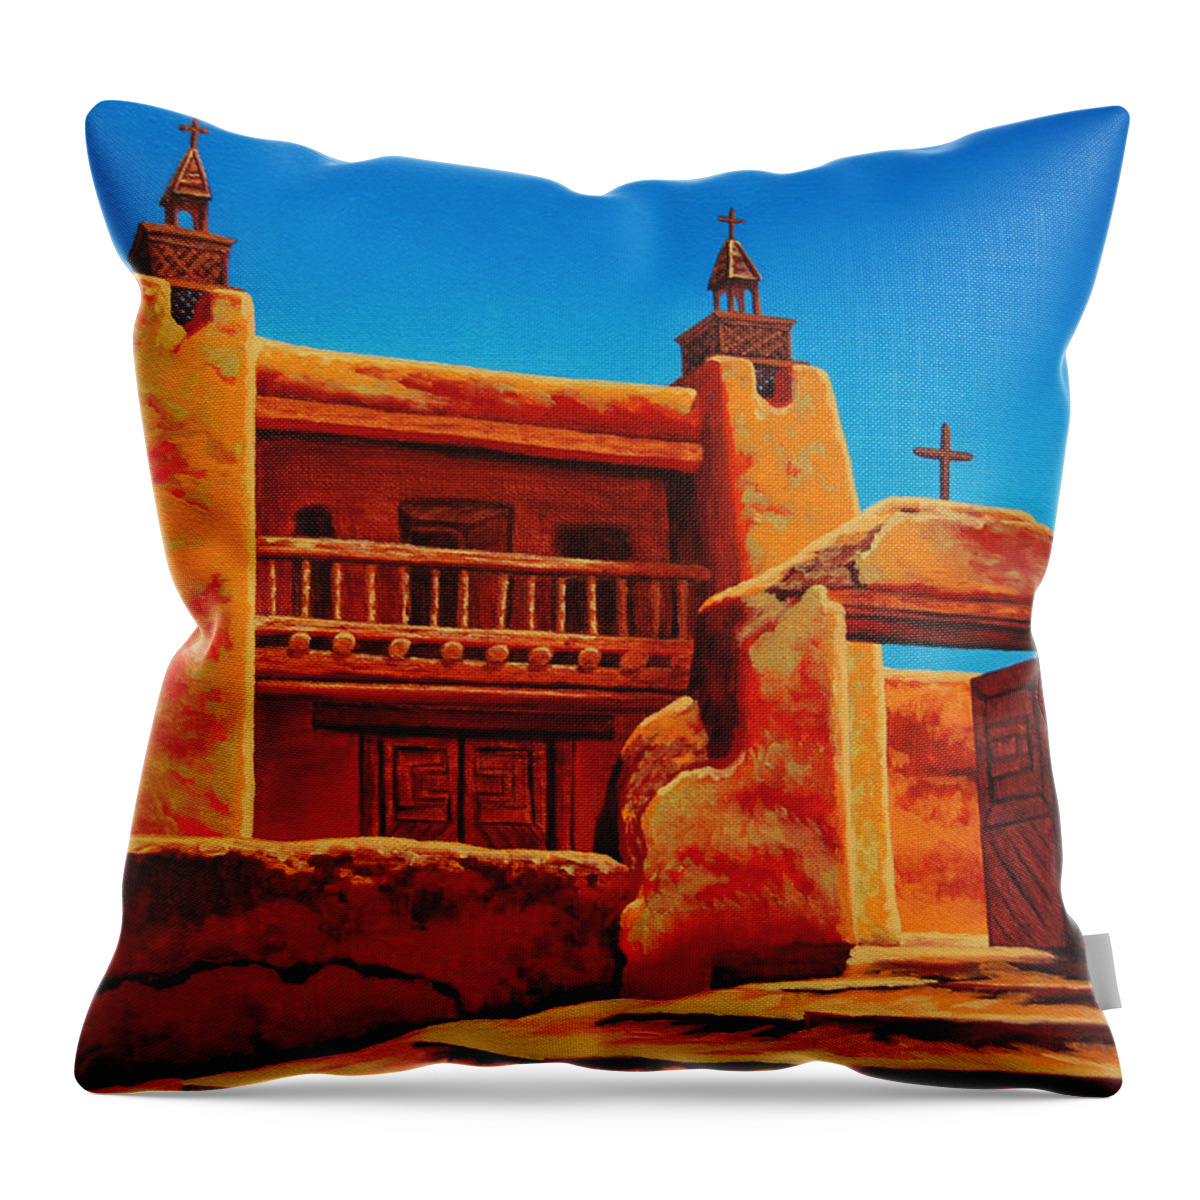 Southwest Throw Pillow featuring the painting Las Trampas by Cheryl Fecht